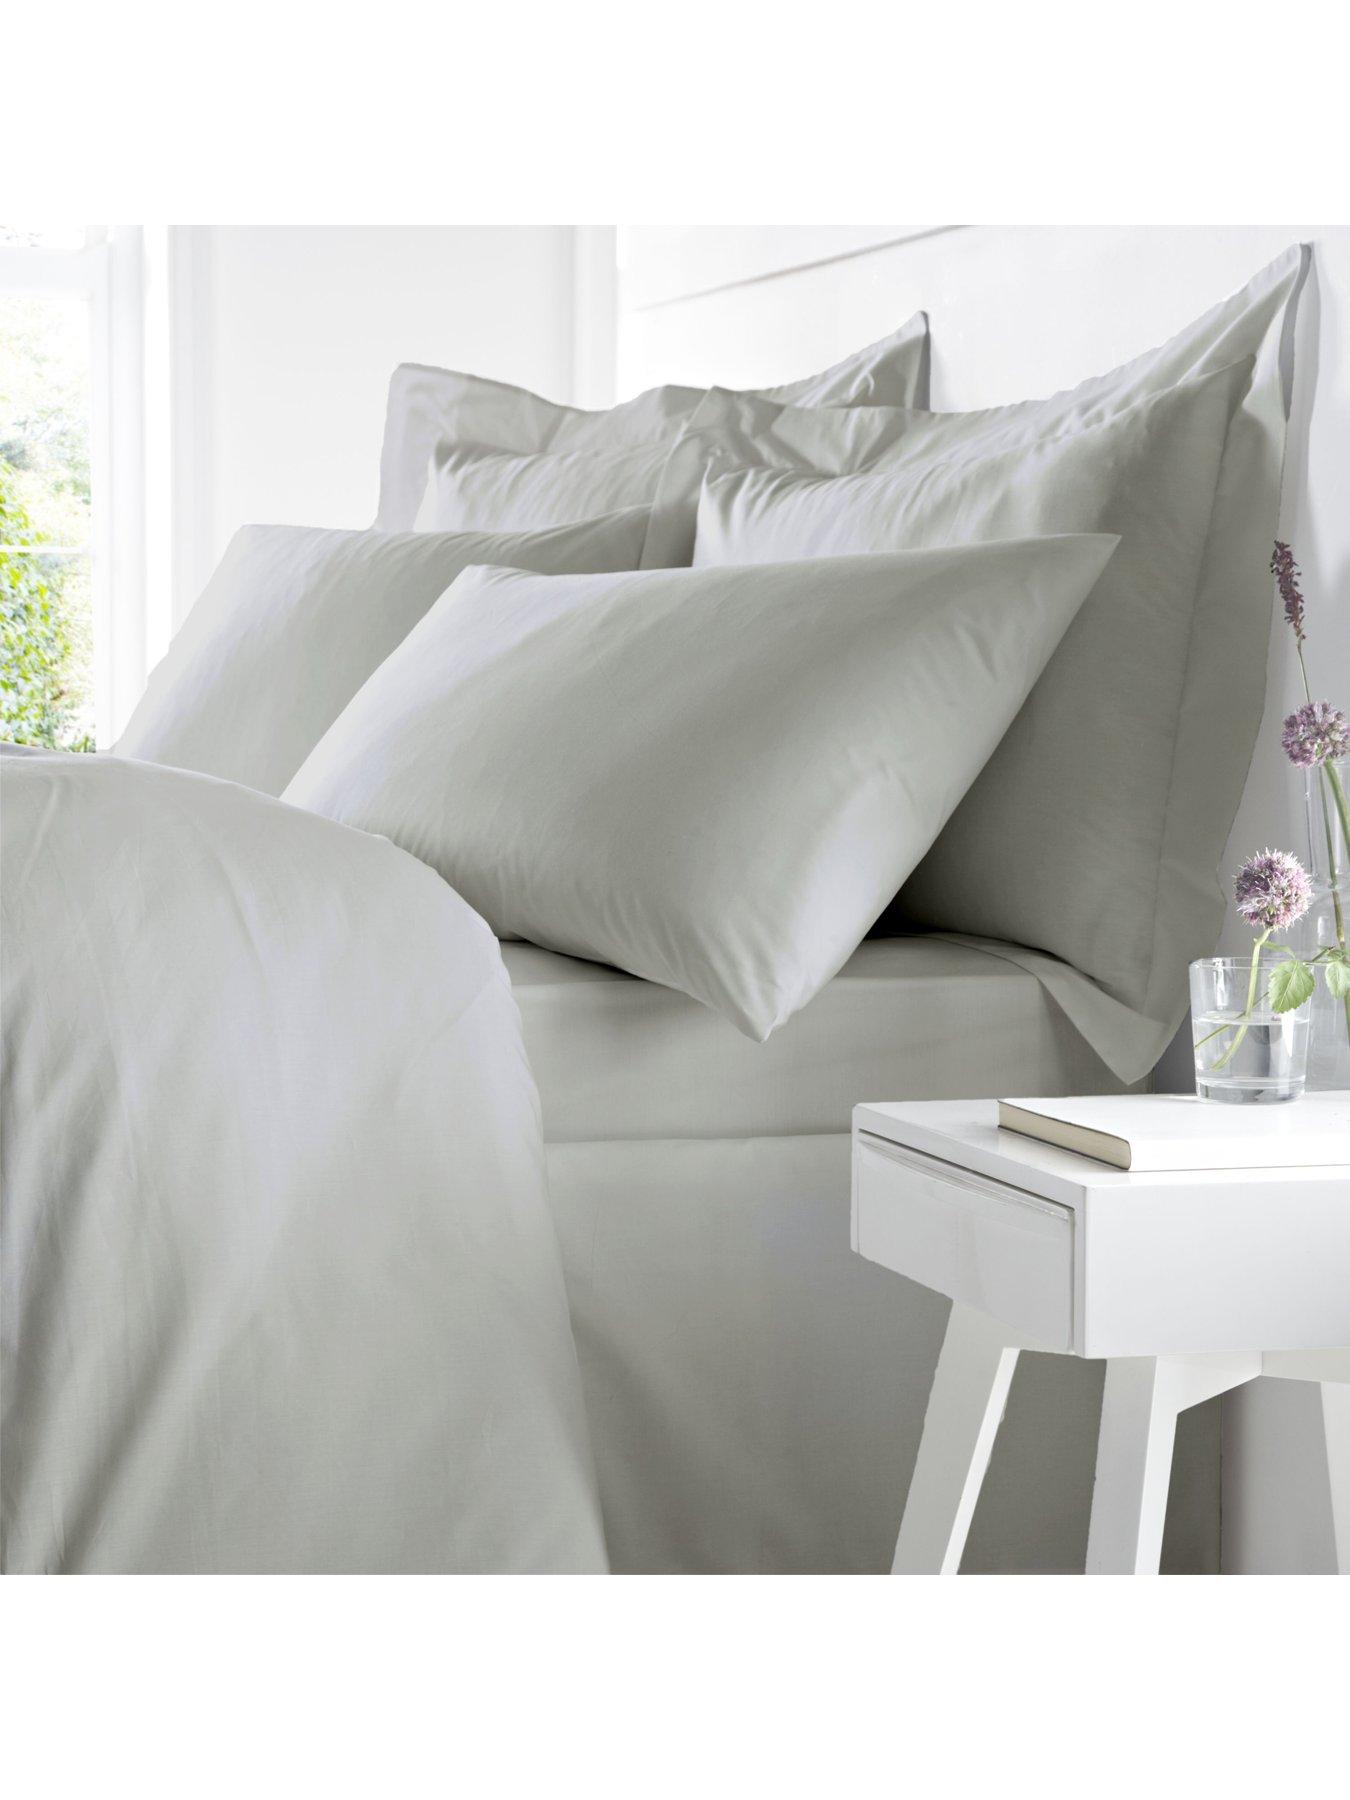 Details about   Select Bedding Item & Sizes 1000 Thread Count Egyptian Cotton White Solid 